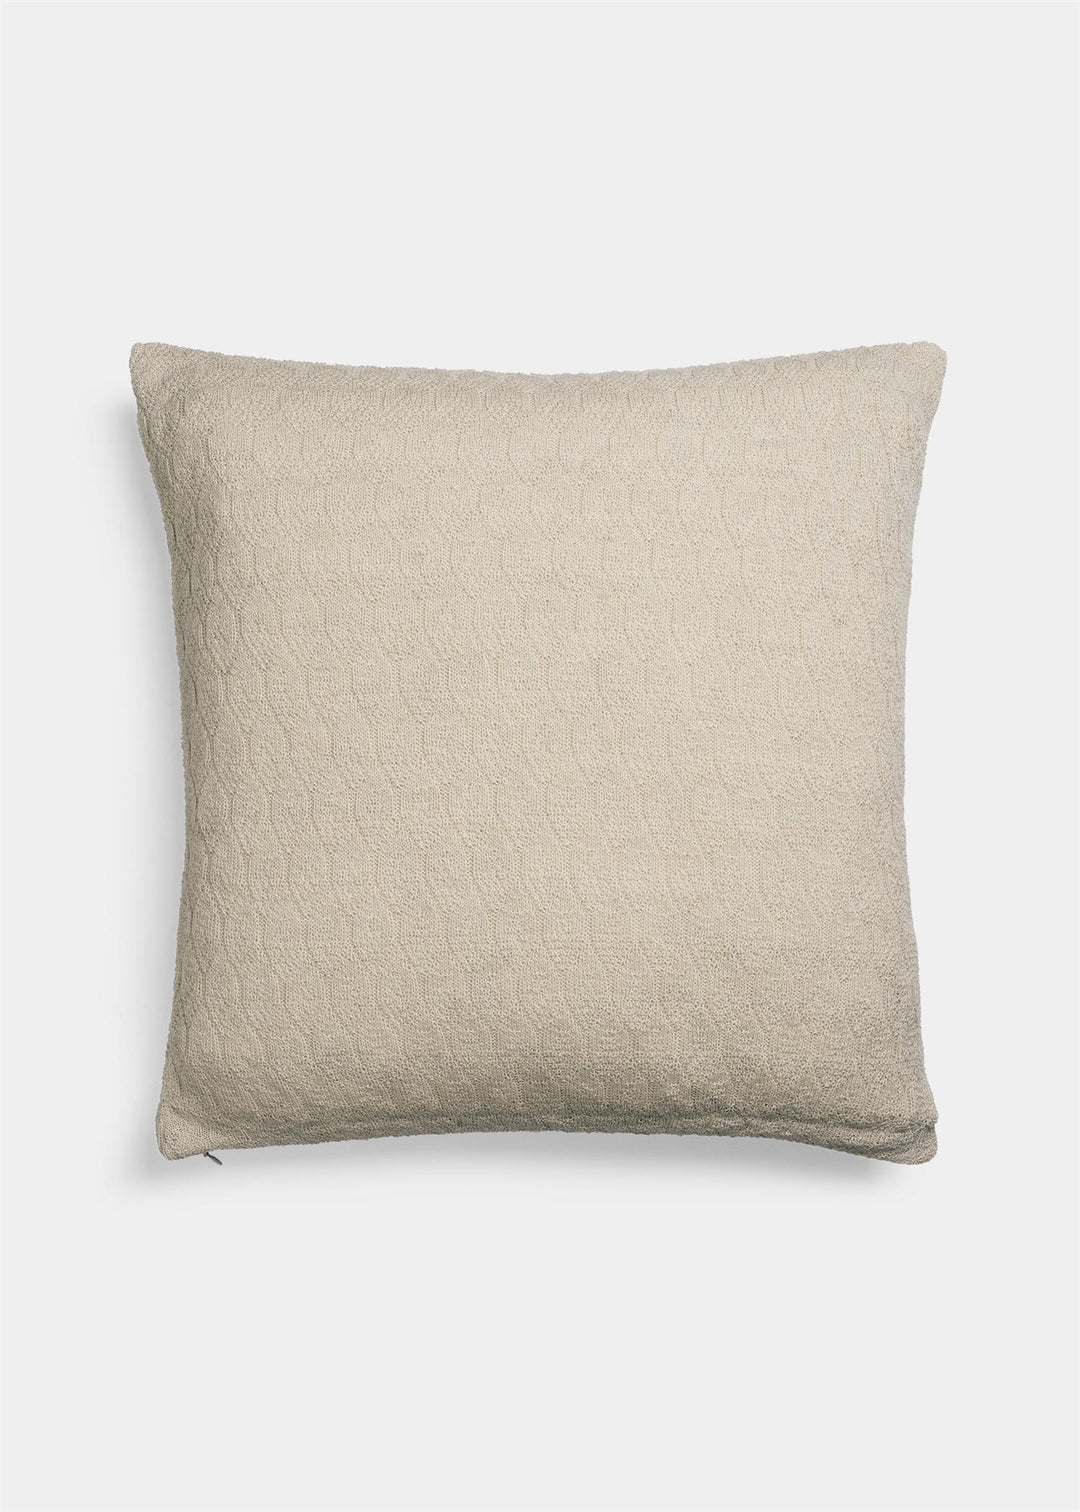 AIAYU - PILLOW RAUL CLASSIC 50*50 - WHEAT - Dale